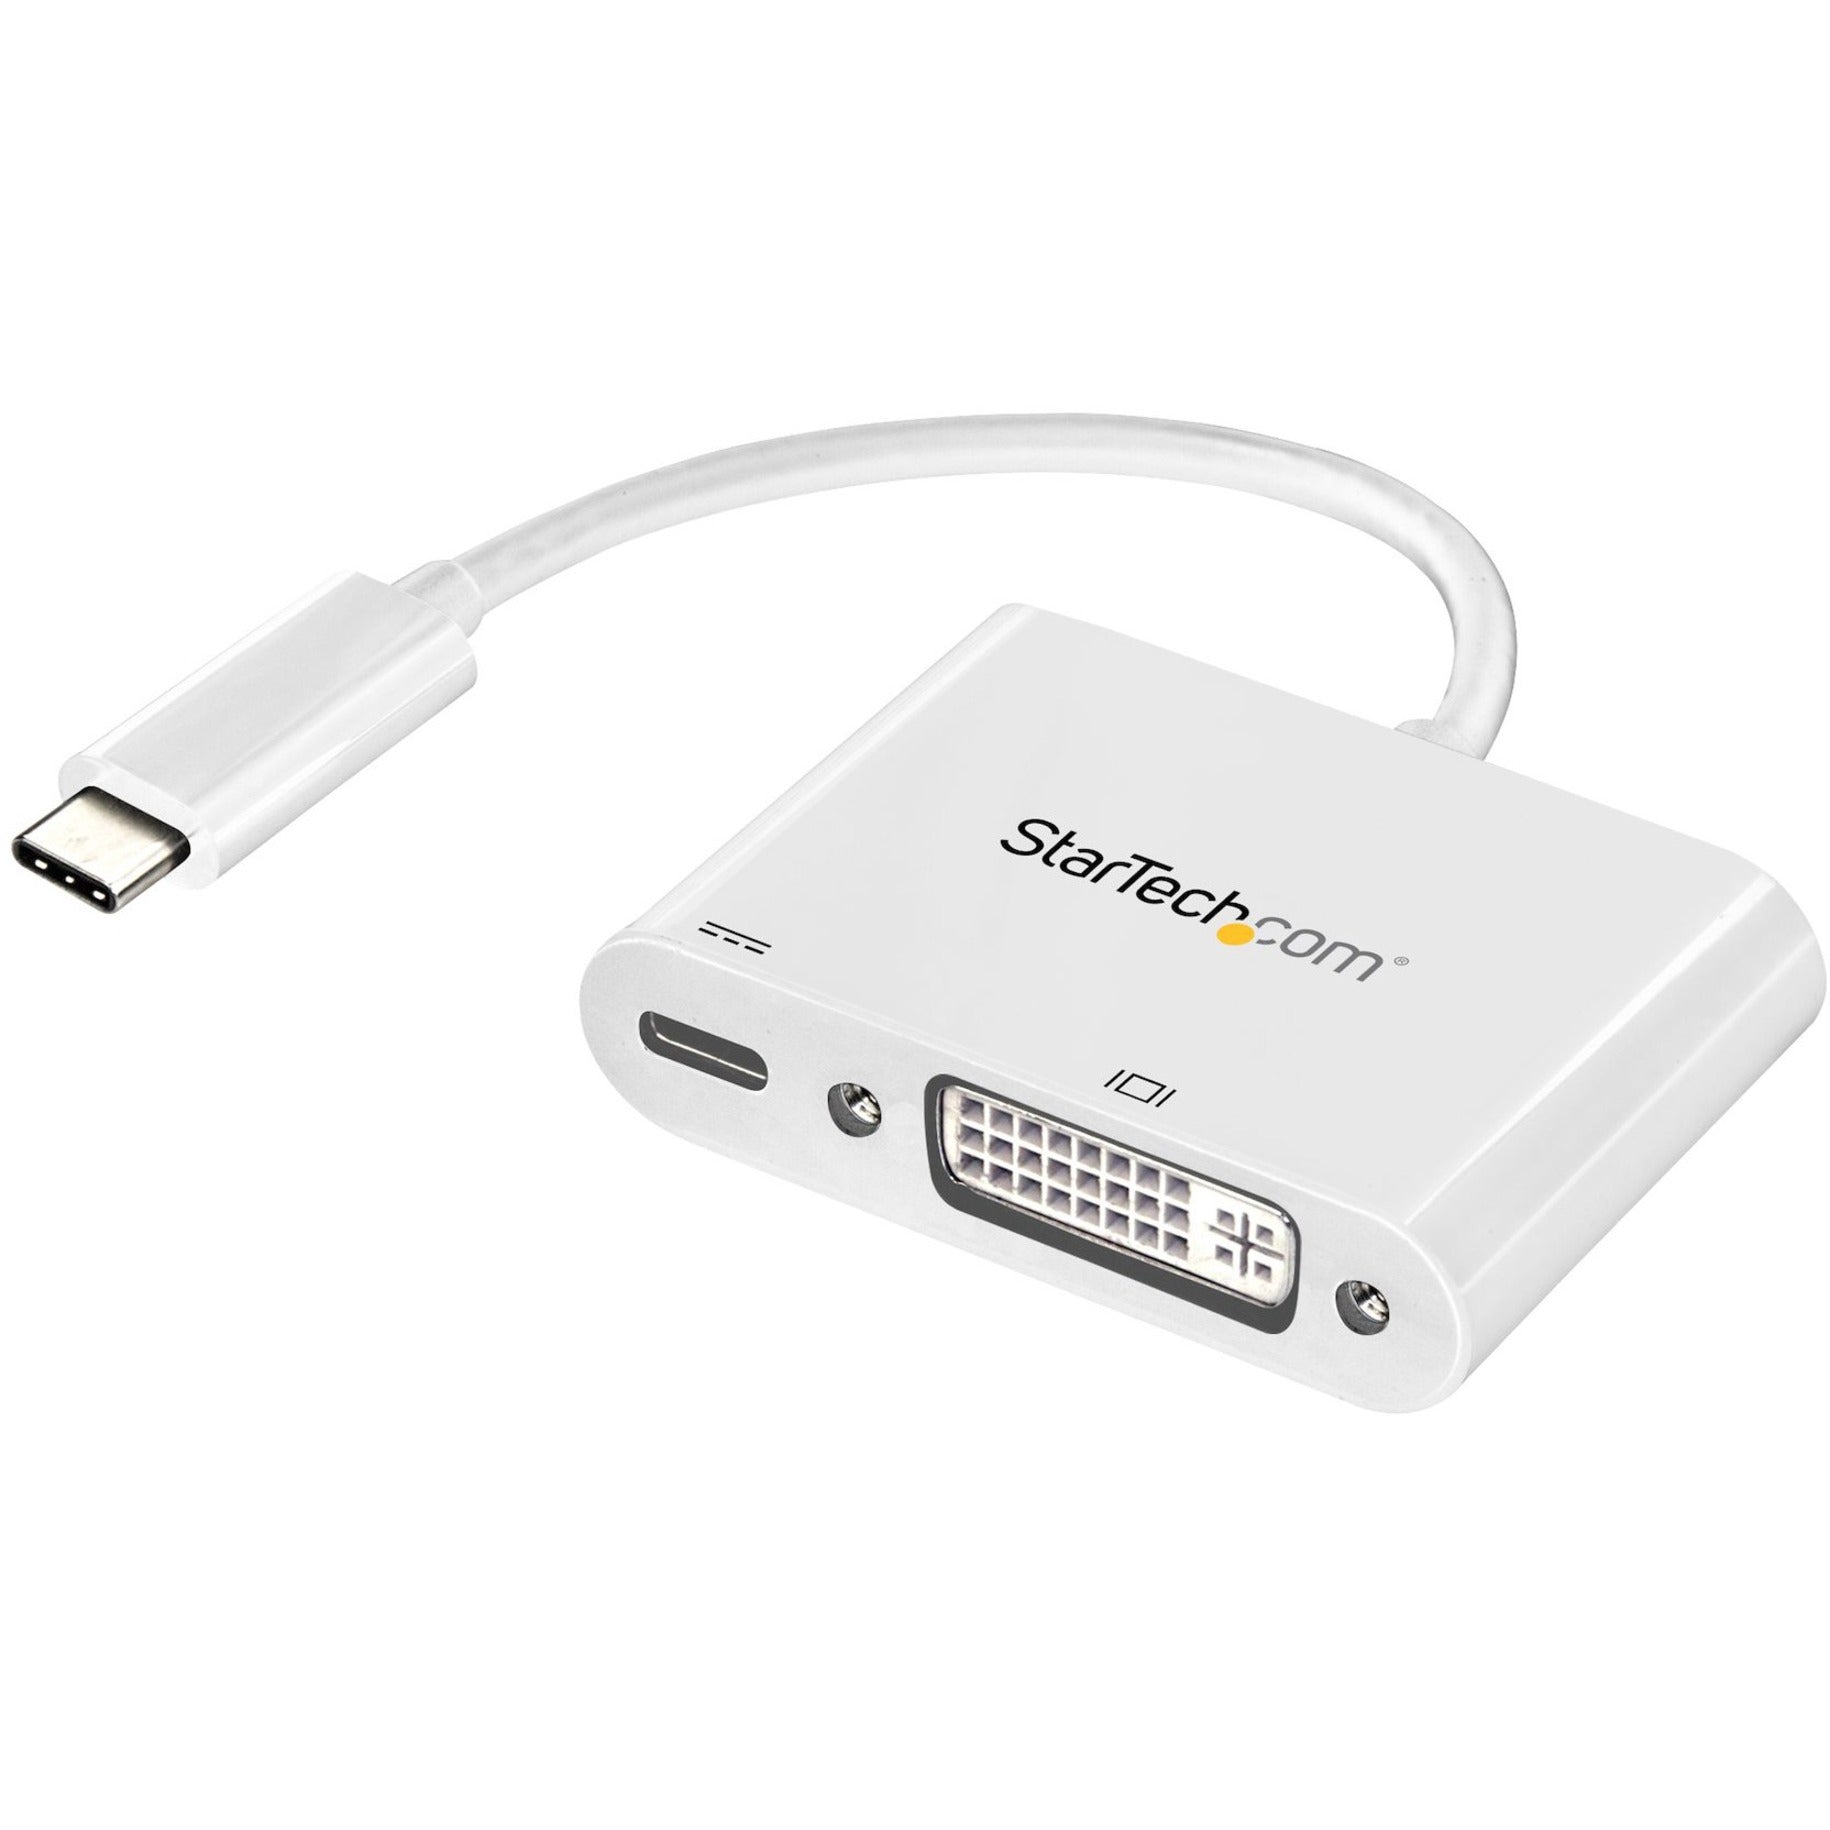 StarTech.com CDP2DVIUCPW USB-C to DVI Adapter with Power Delivery, USB Type C Adapter, 1920 x 1200, White